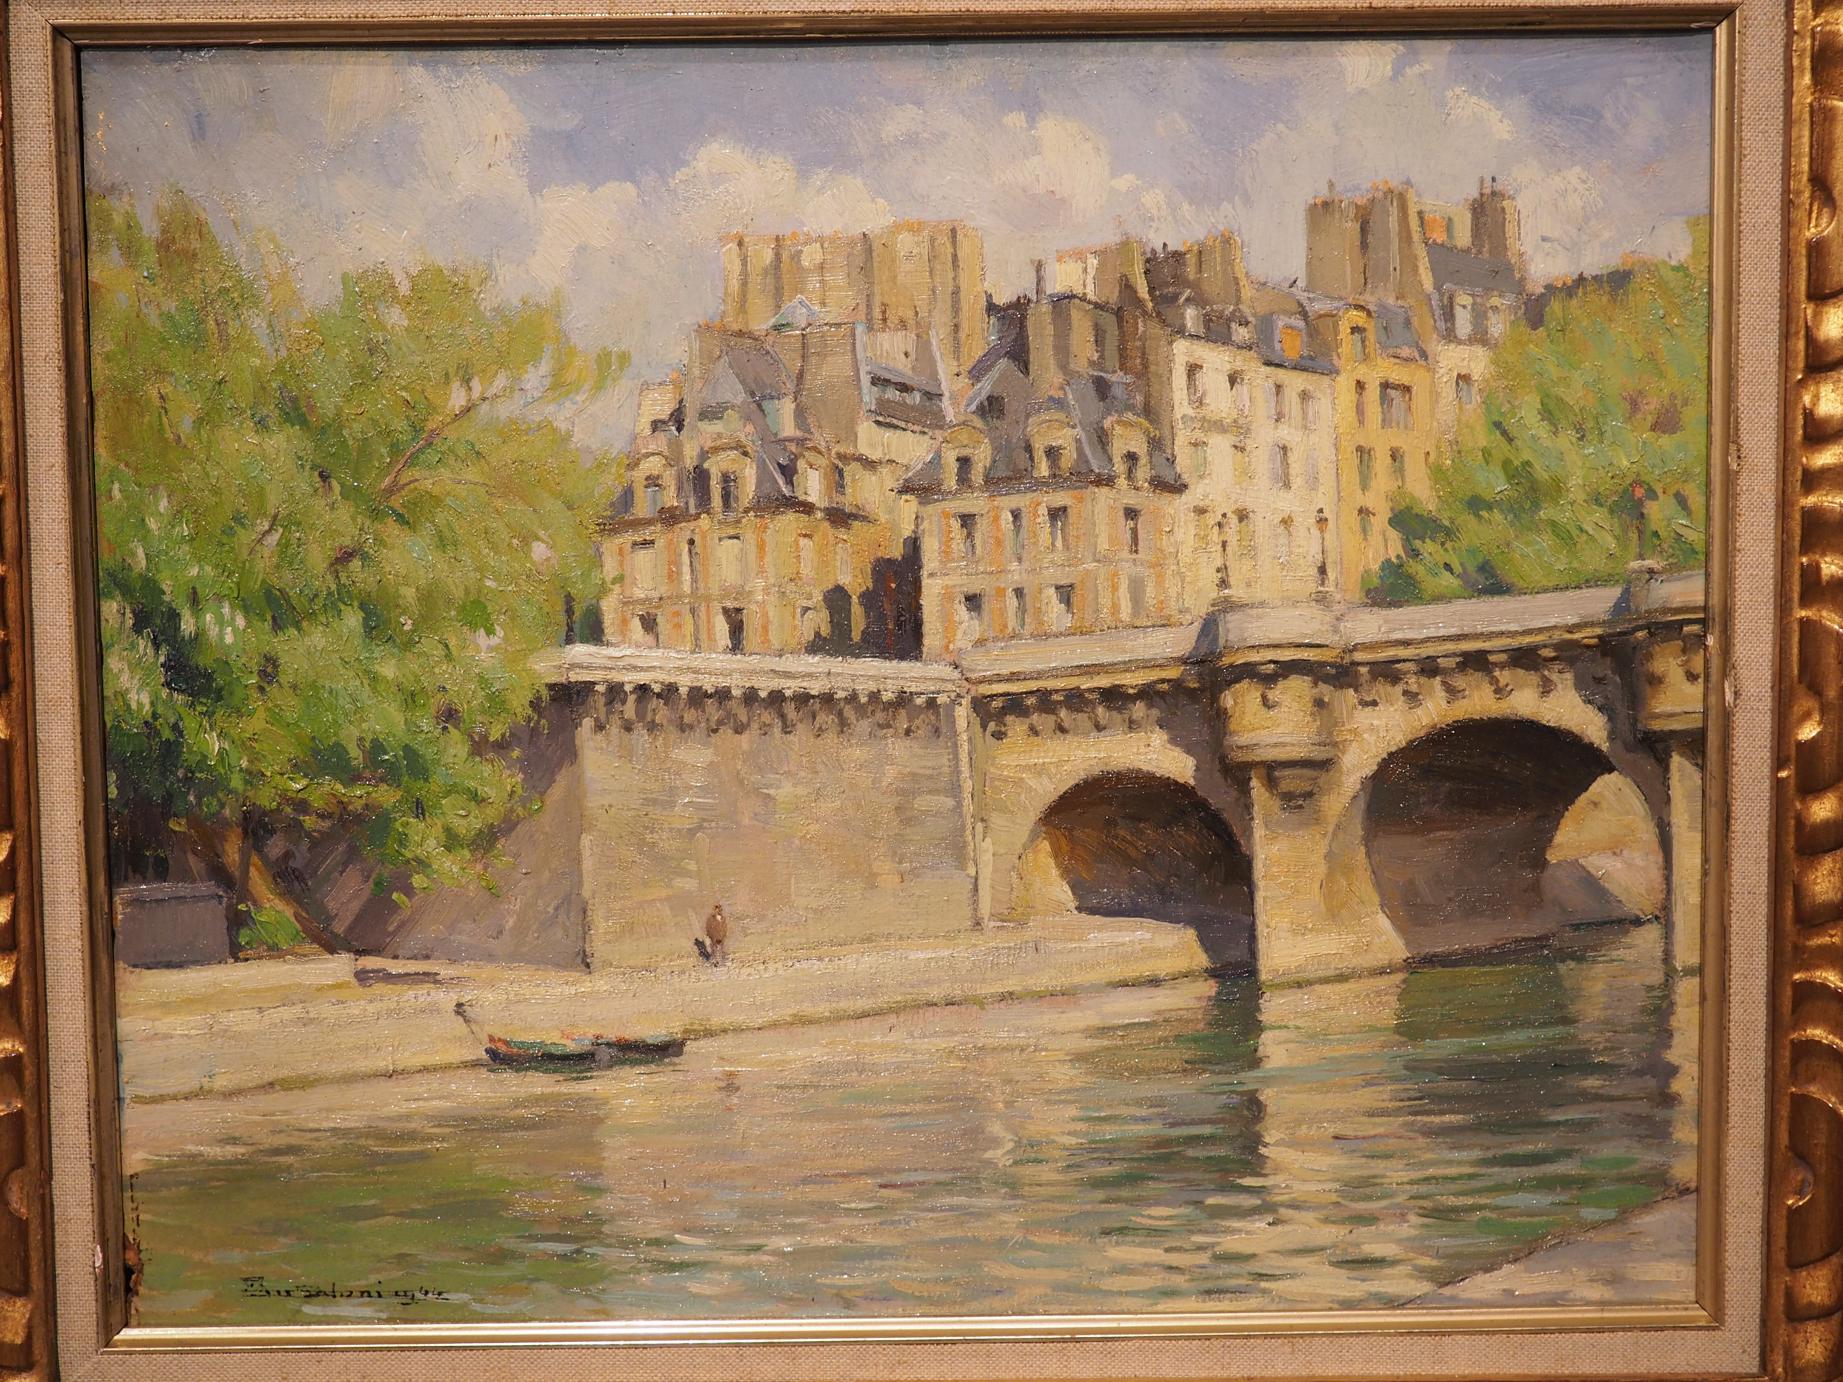 Le Pont Neuf Painting in Giltwood Frame by Ansaloni, Dated 1944 - Le Louvre  French Antiques